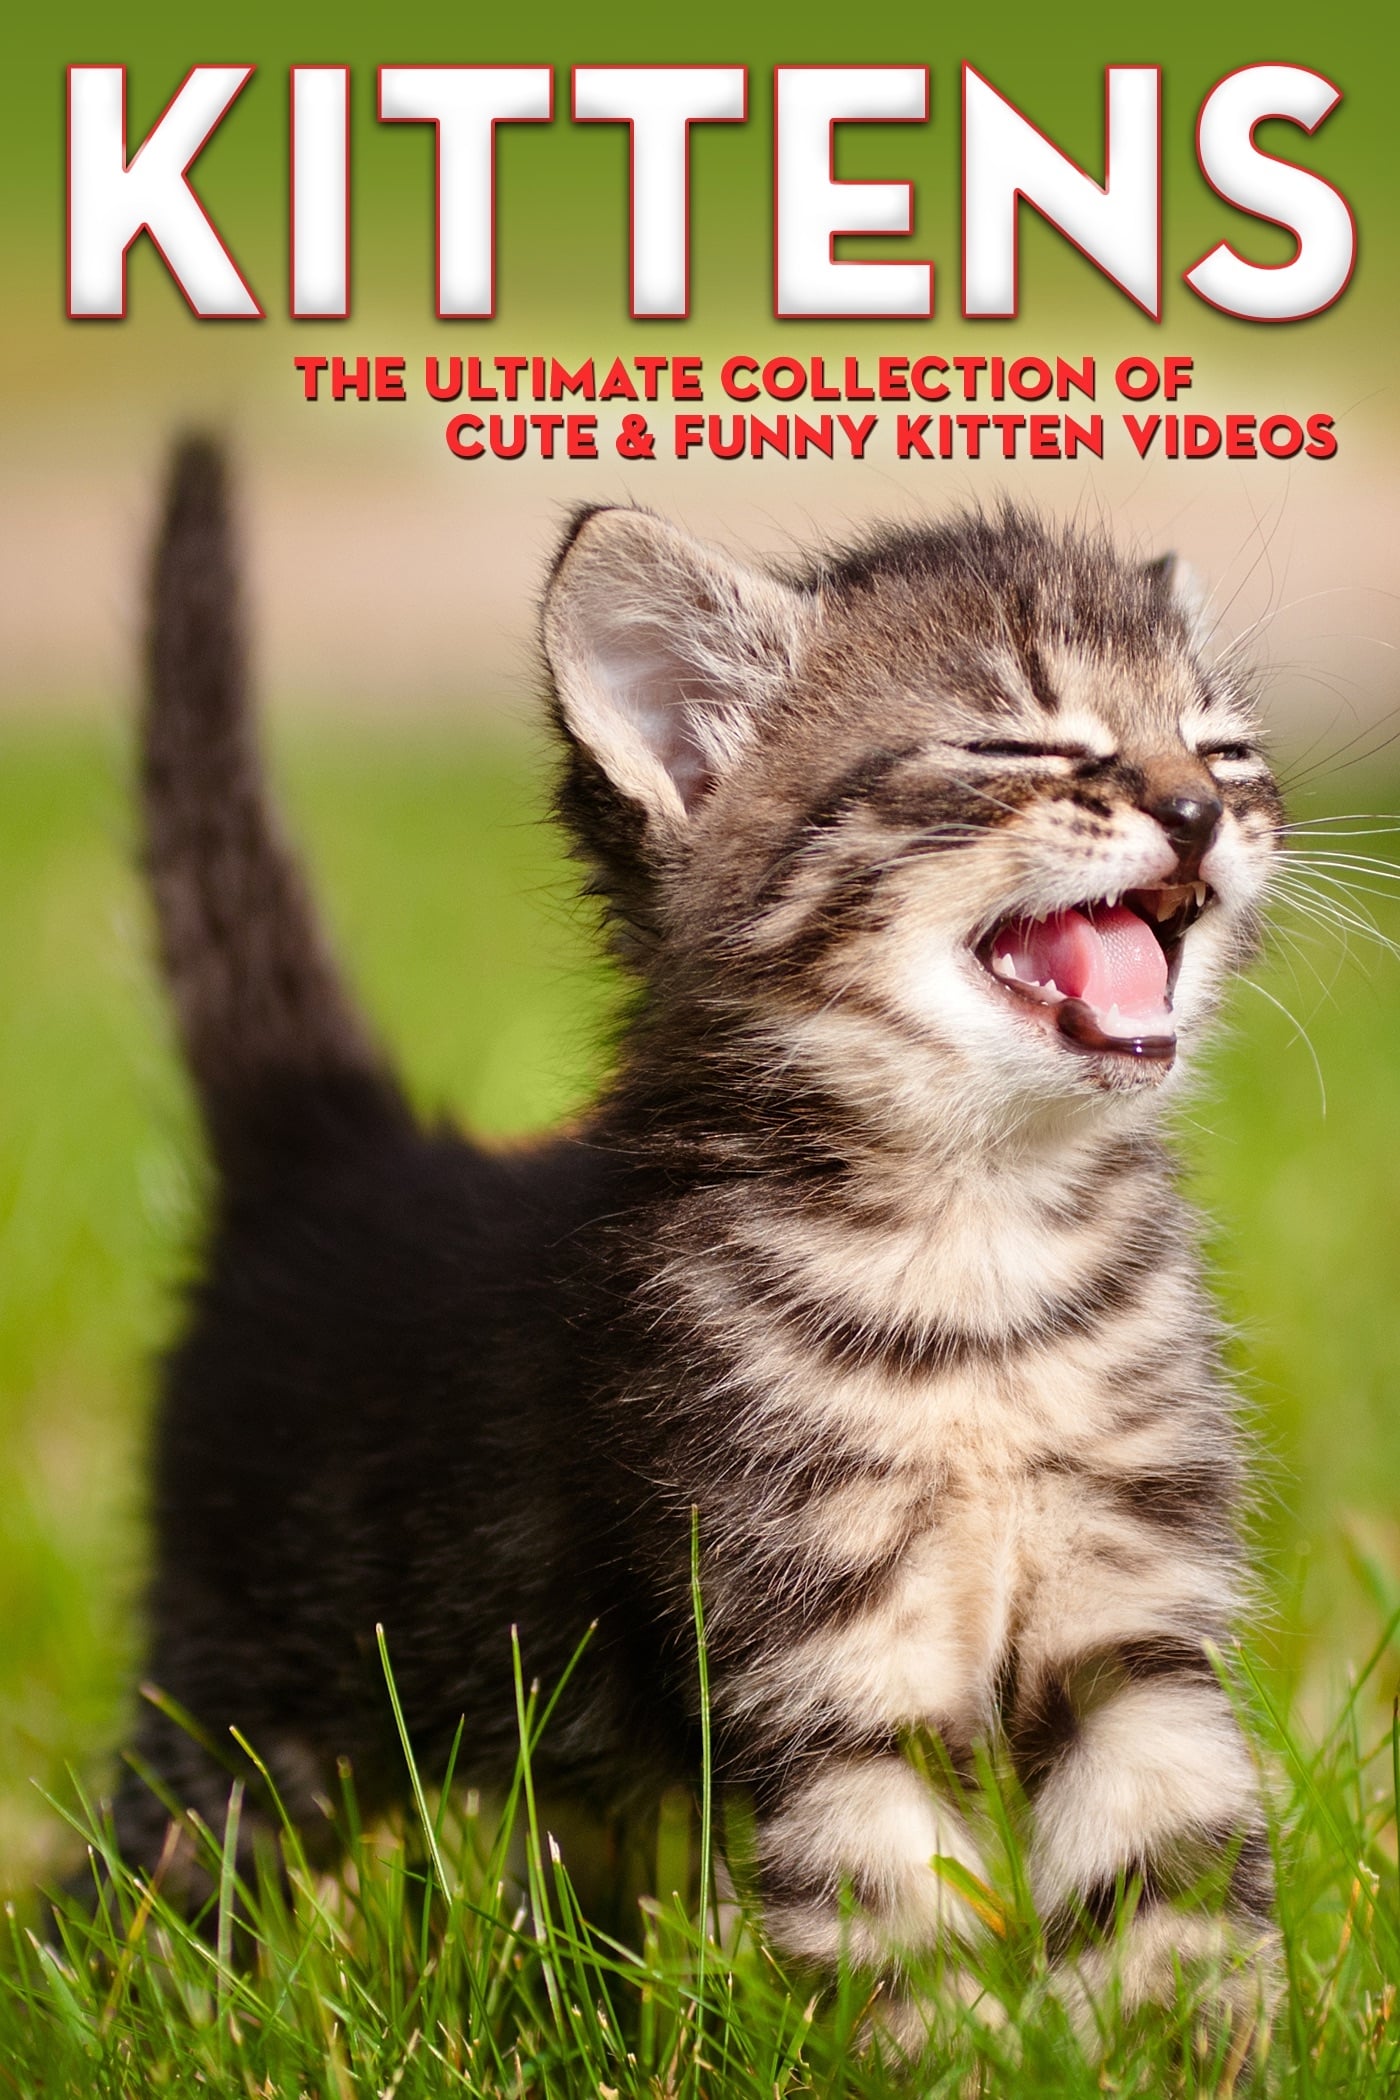 Kittens The Ultimate Collection of Cute & Funny Kitten Videos on FREECABLE TV